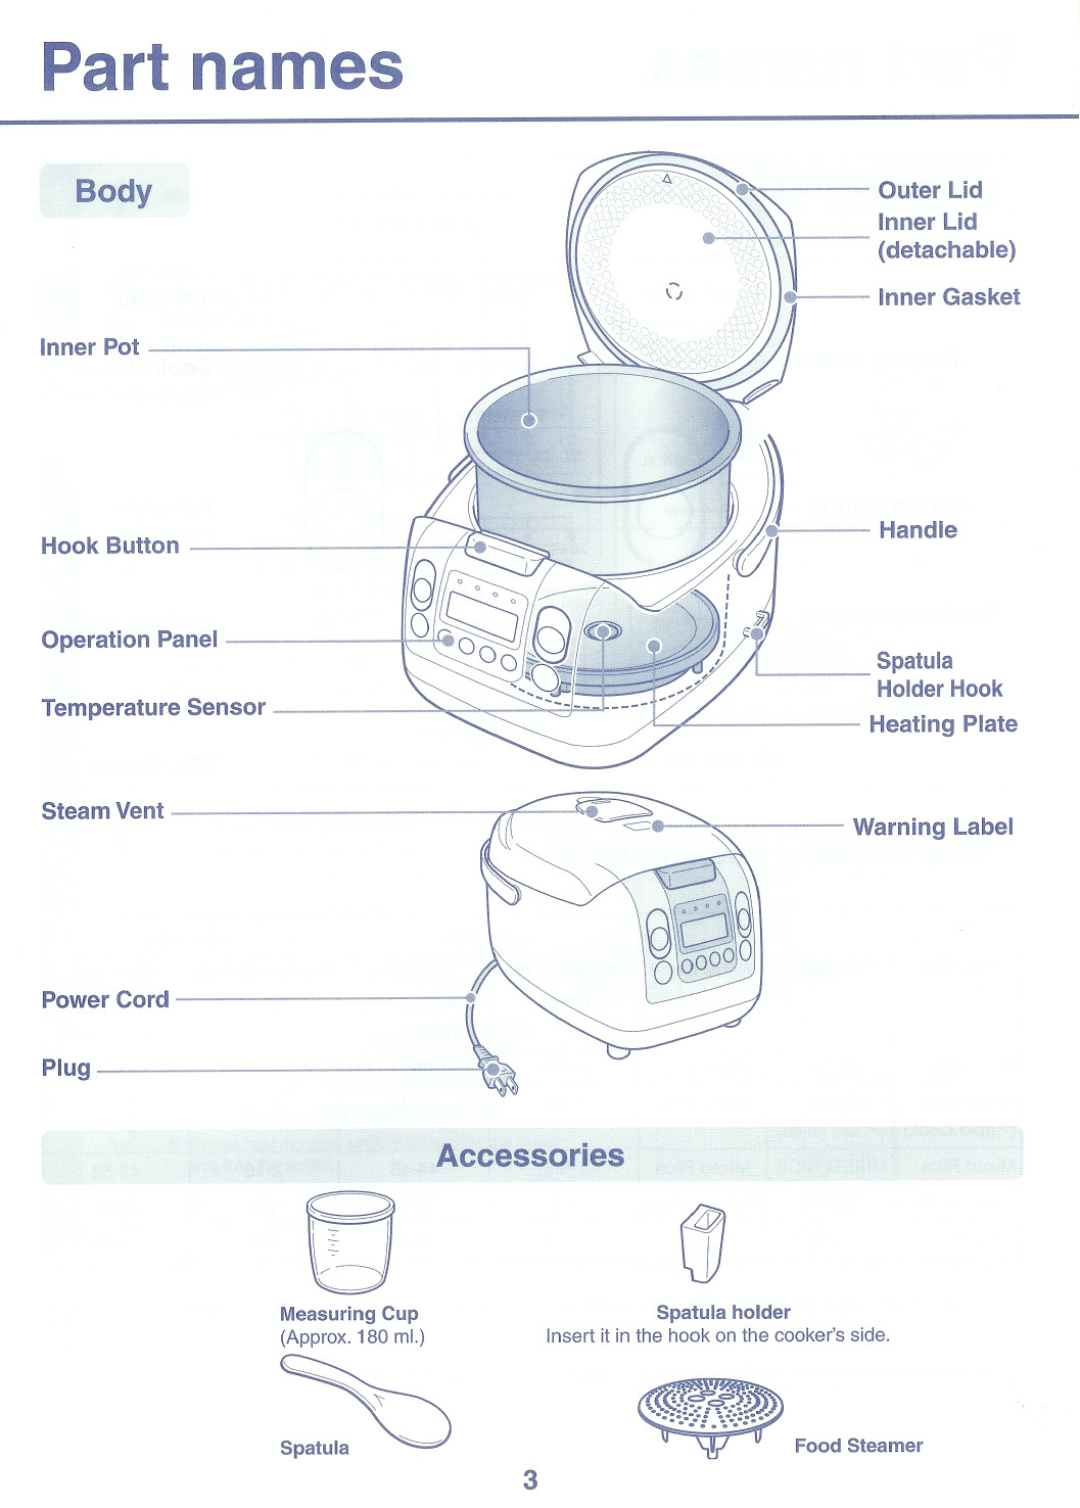 Toshiba RC-10NMF Part names, Body, Accessories, InnerPot, Spatula holder, Food Steamer, Measuring Cup, Approx.180 ml 